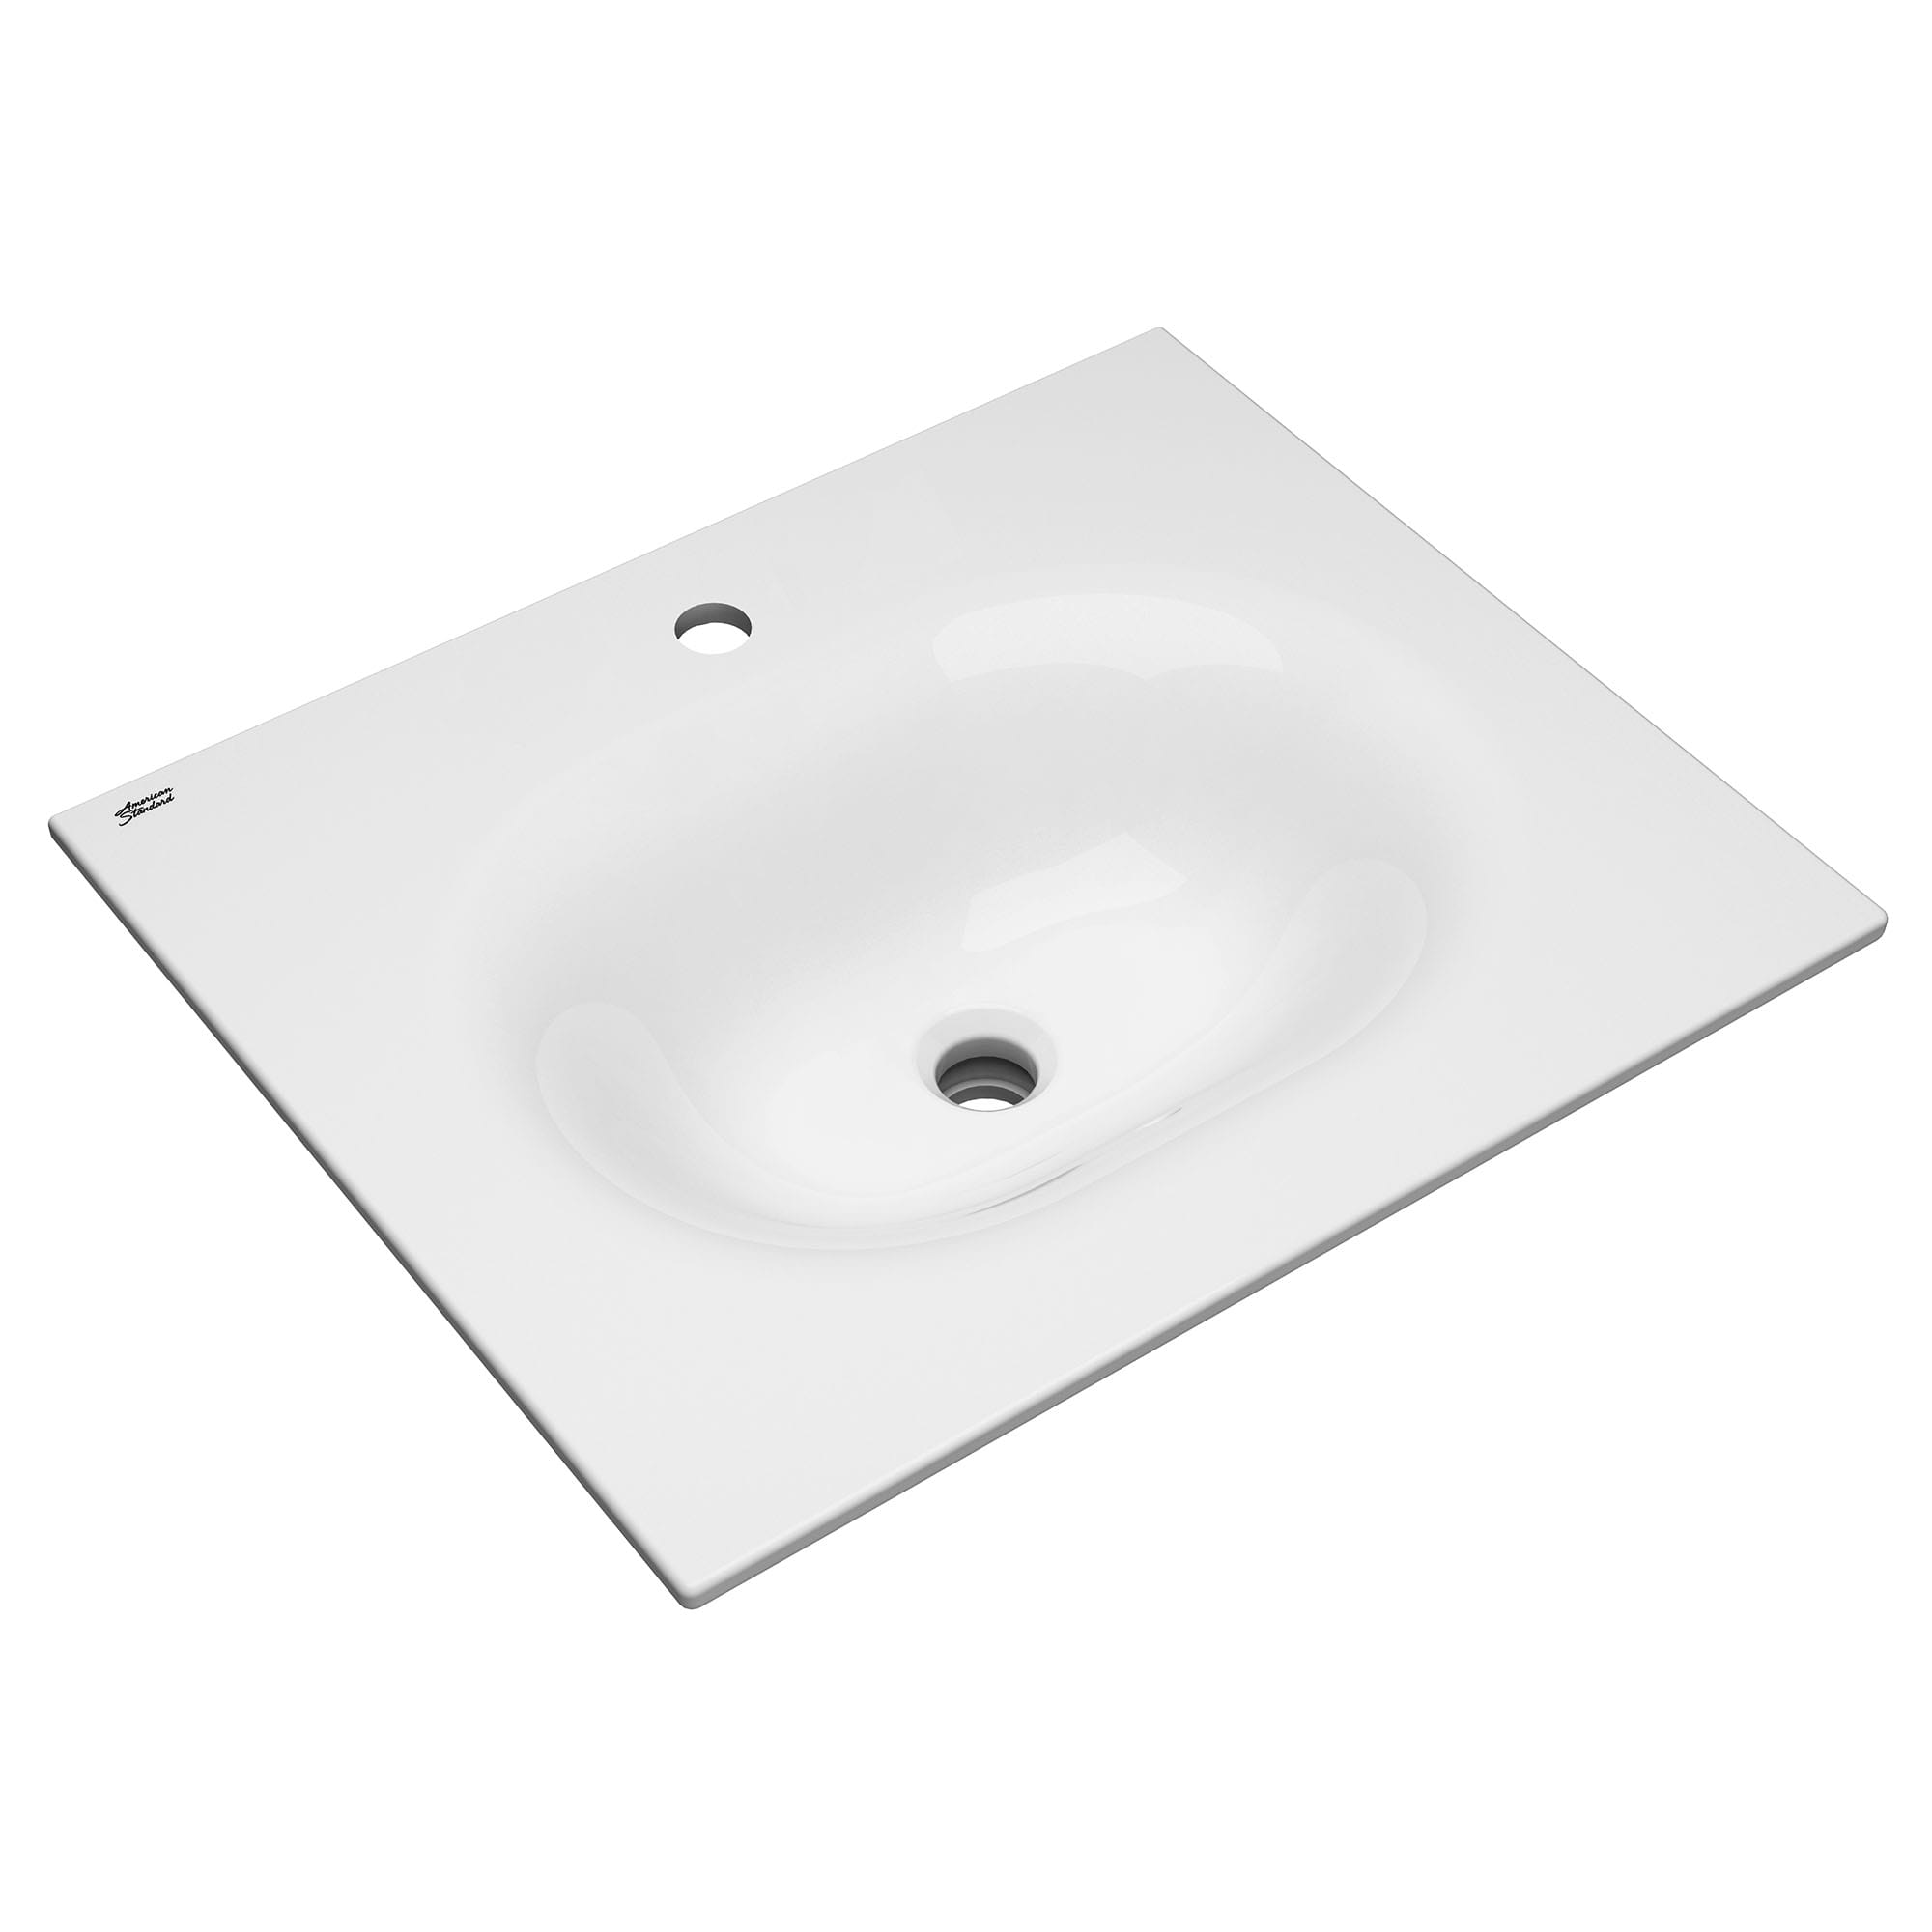 Studio S 24 Inch Vitreous China Vanity Sink Top Center Hole Only WHITE